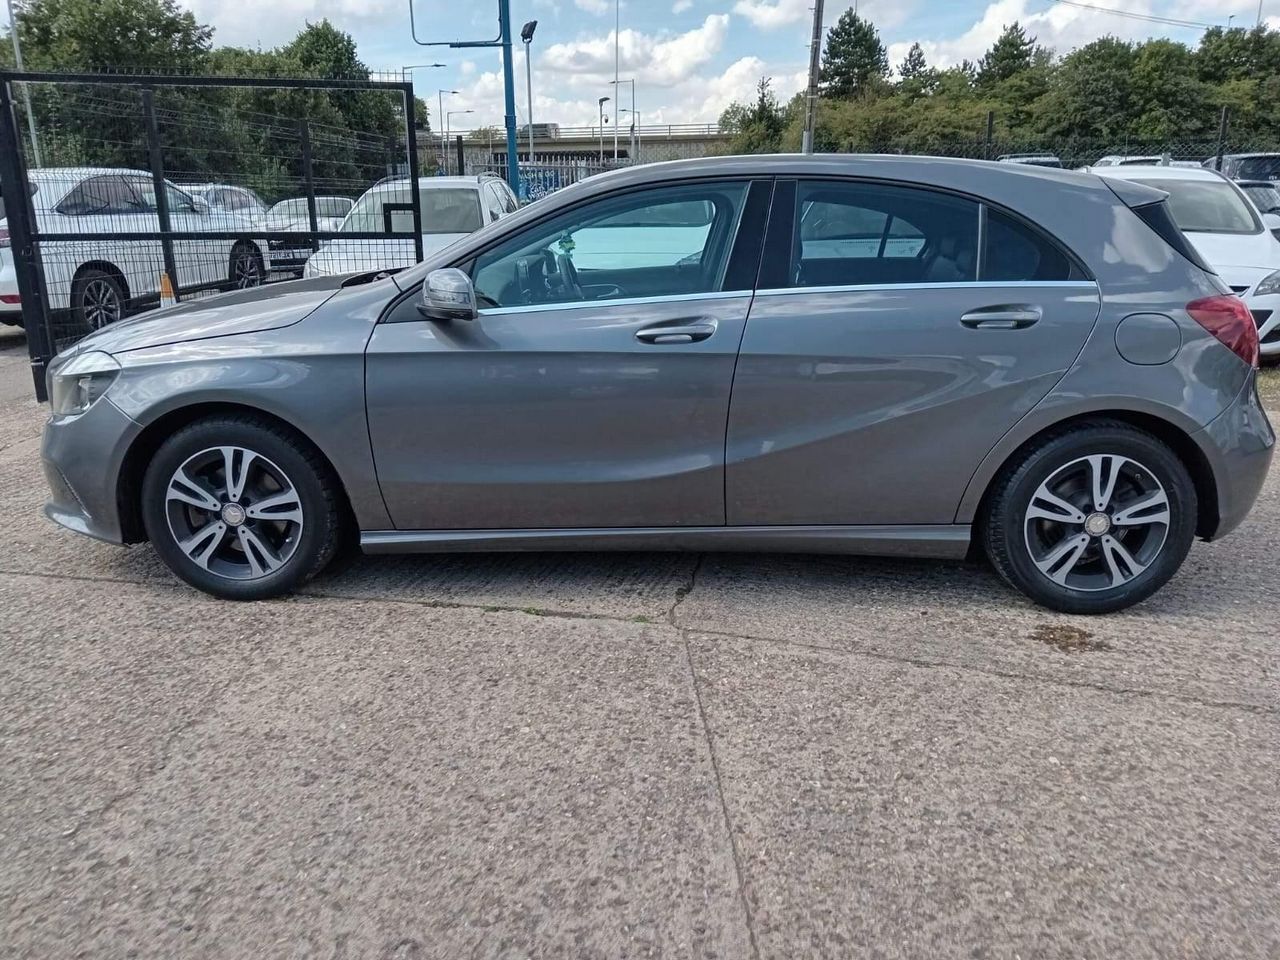 2016 Mercedes-Benz A Class 1.6 A180 SE 7G-DCT Euro 6 (s/s) 5dr - Picture 4 of 33